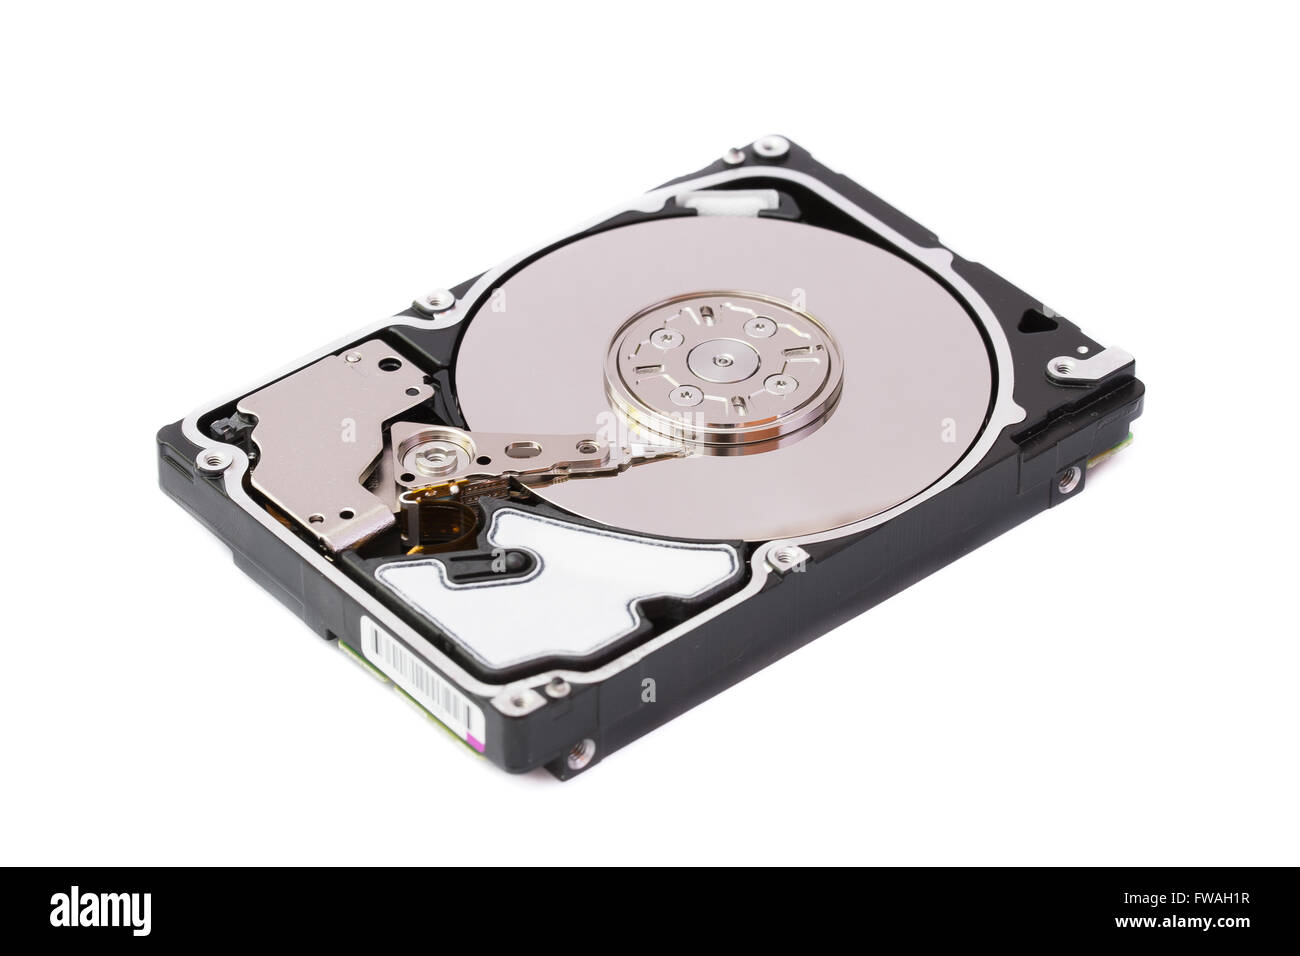 2.5-inch hard drive on white background. Stock Photo